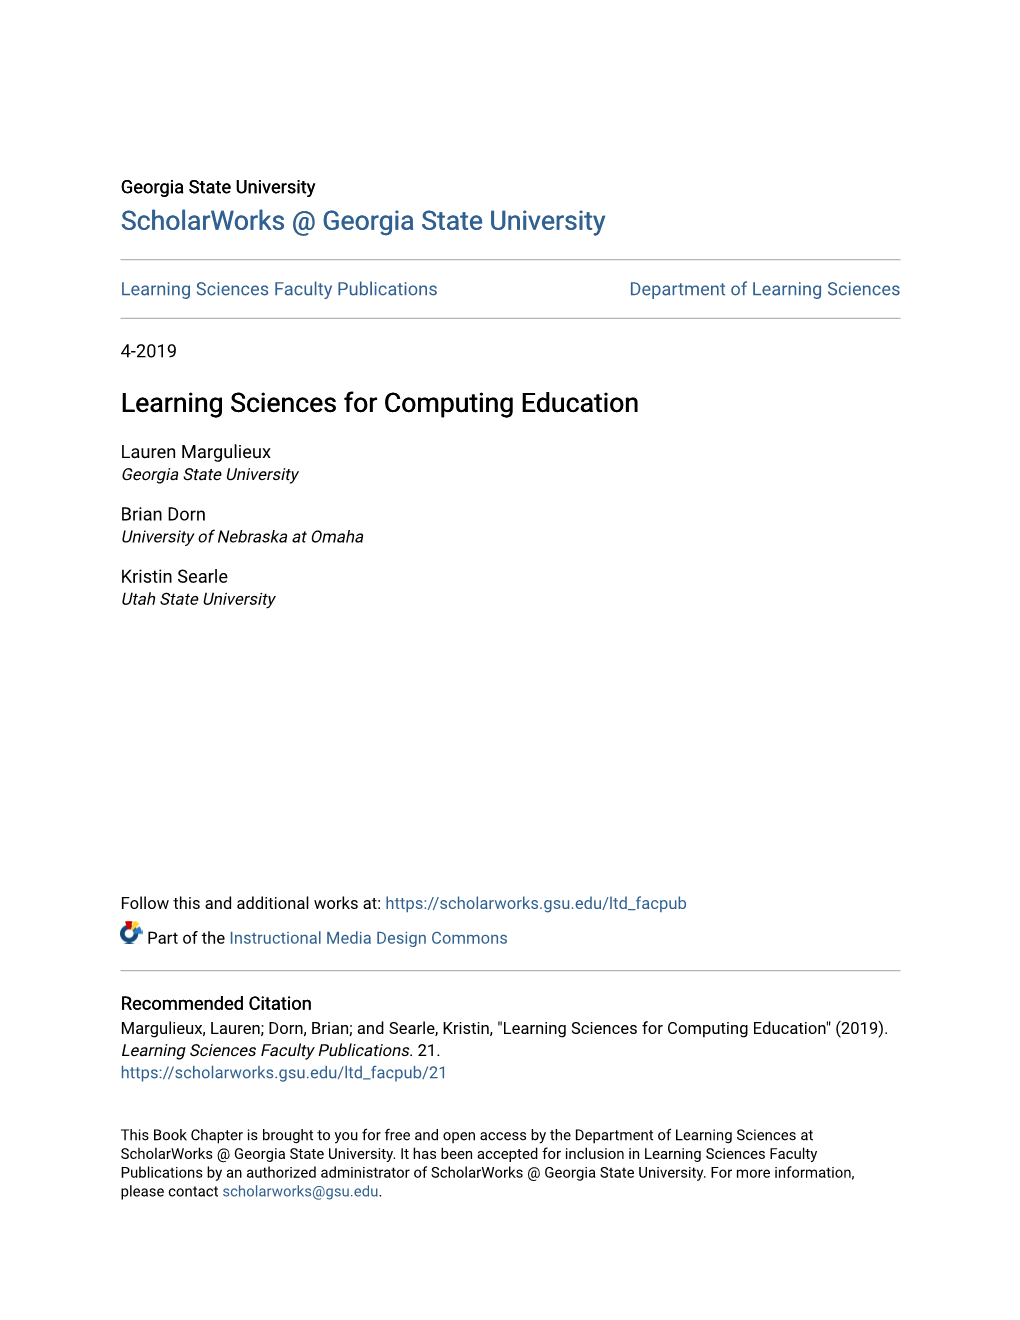 Learning Sciences for Computing Education